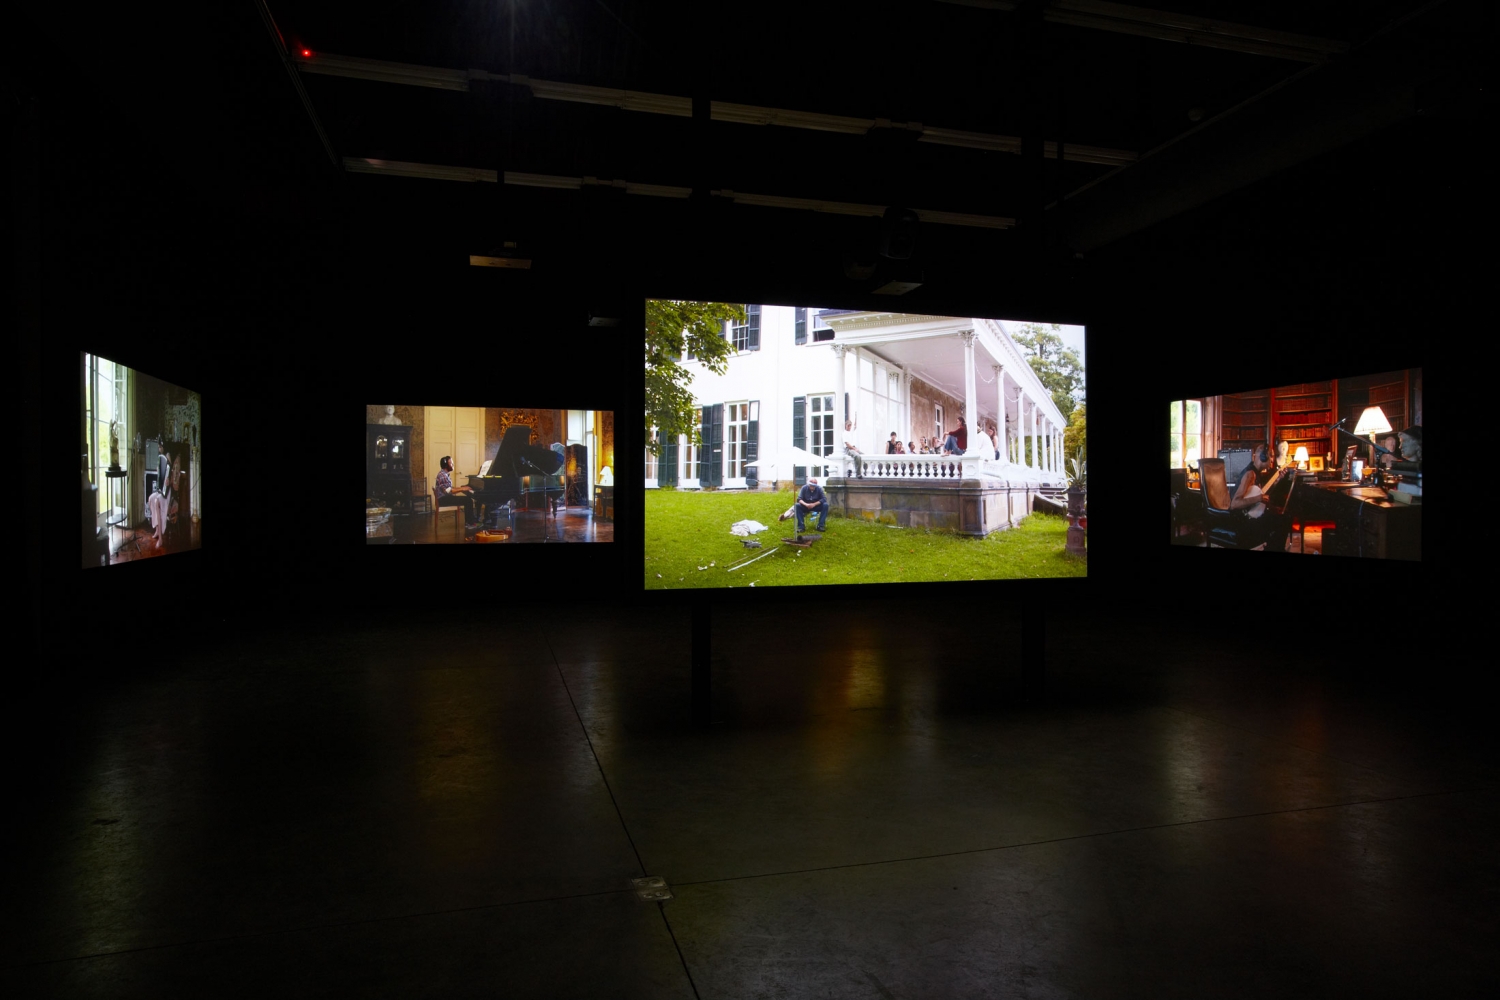 Ragnar Kjartansson
The Visitors, 2012
Nine-channel HD video projection
Duration: 1 hour, 4 minutes
Installation view
February 1 &amp;ndash; March 23, 2013
Luhring Augustine, New York